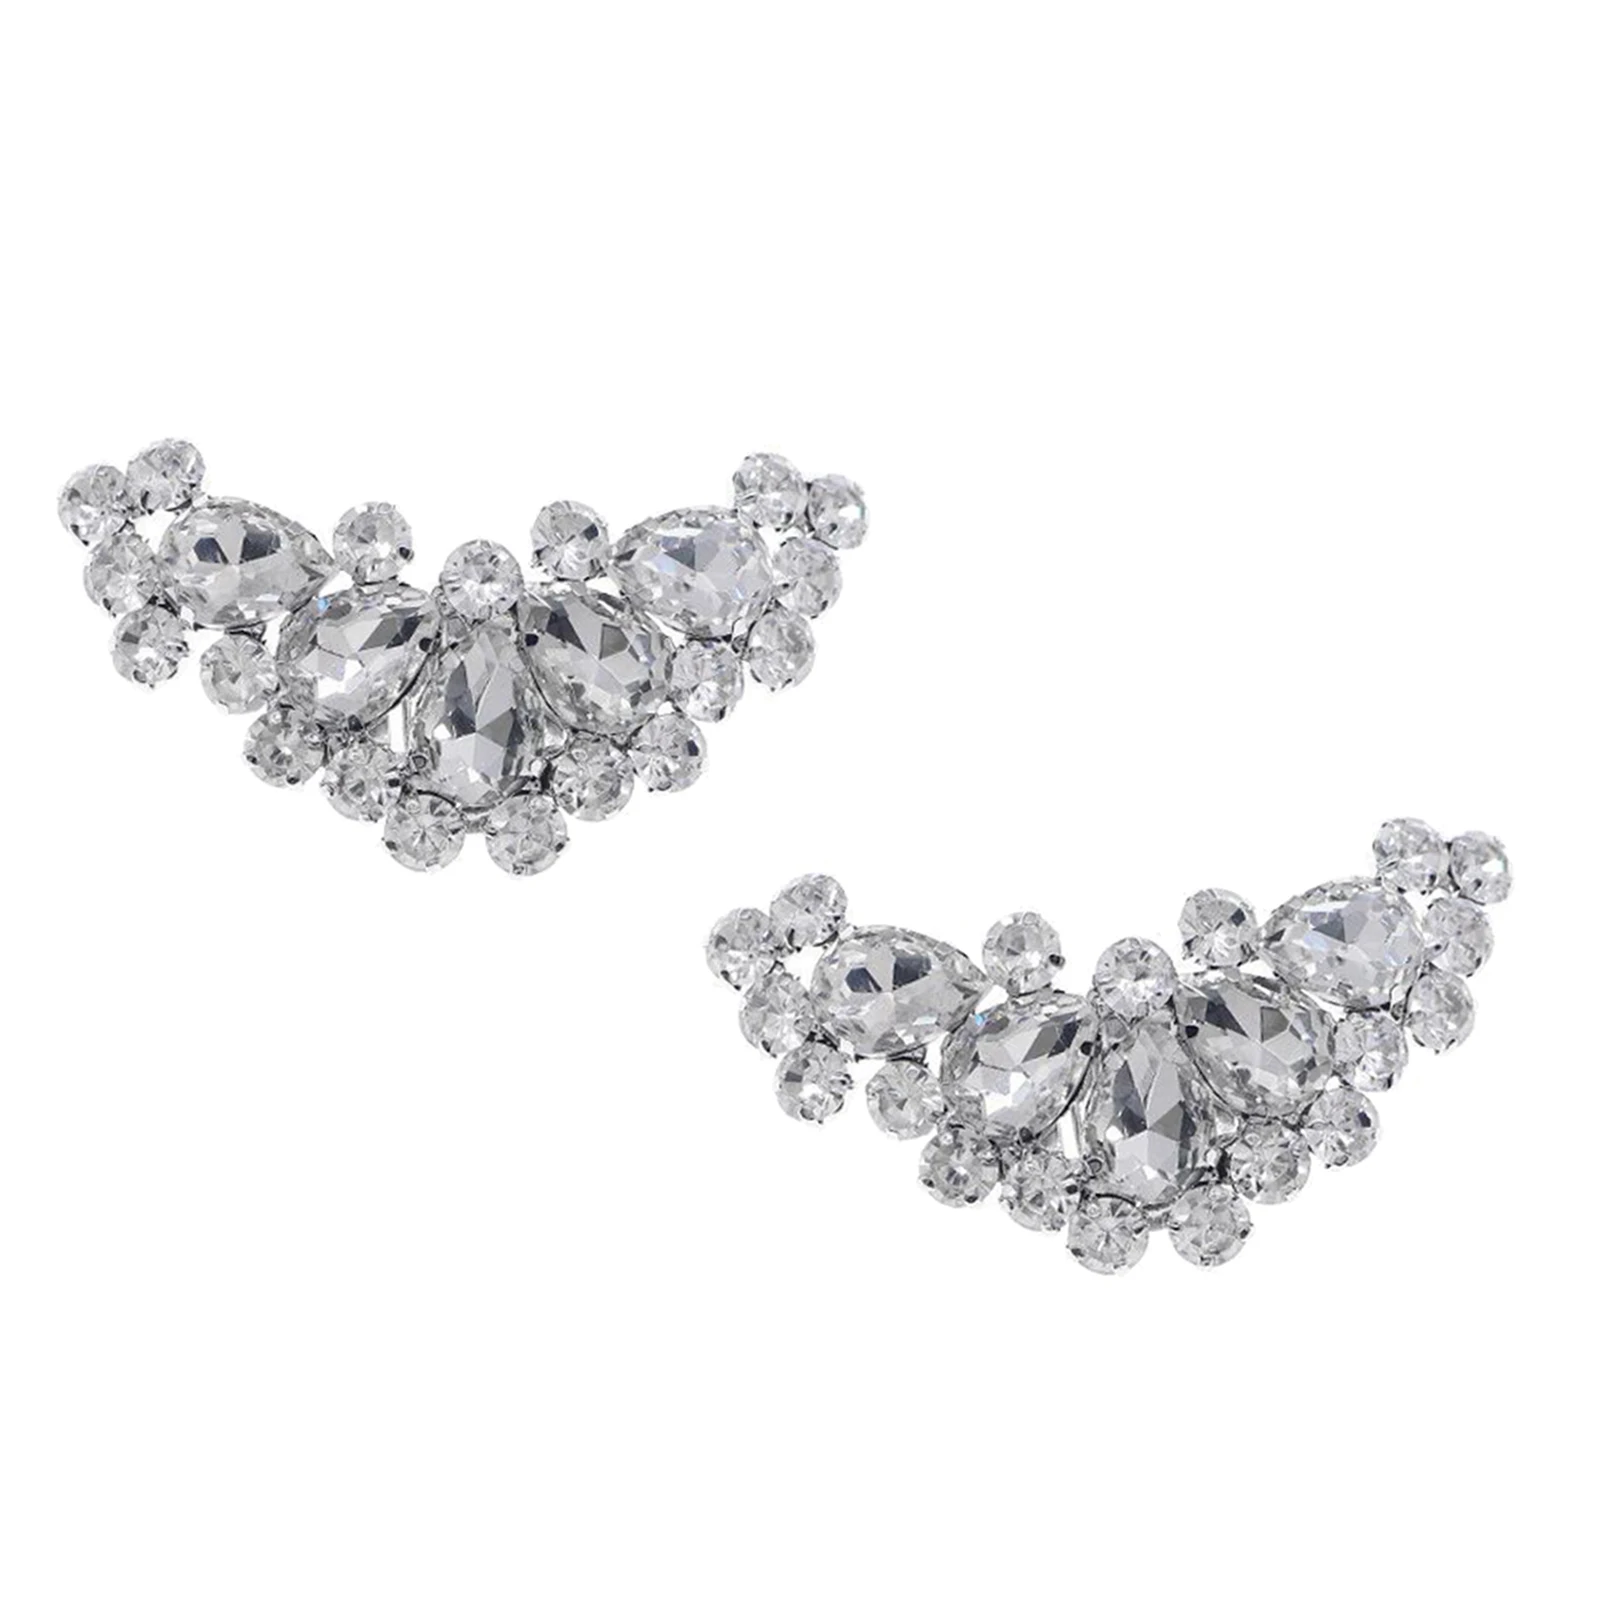 Pair Crystal Shoe Clips Patch Charm Tone Buckle Wedding Bridal Party Decorations